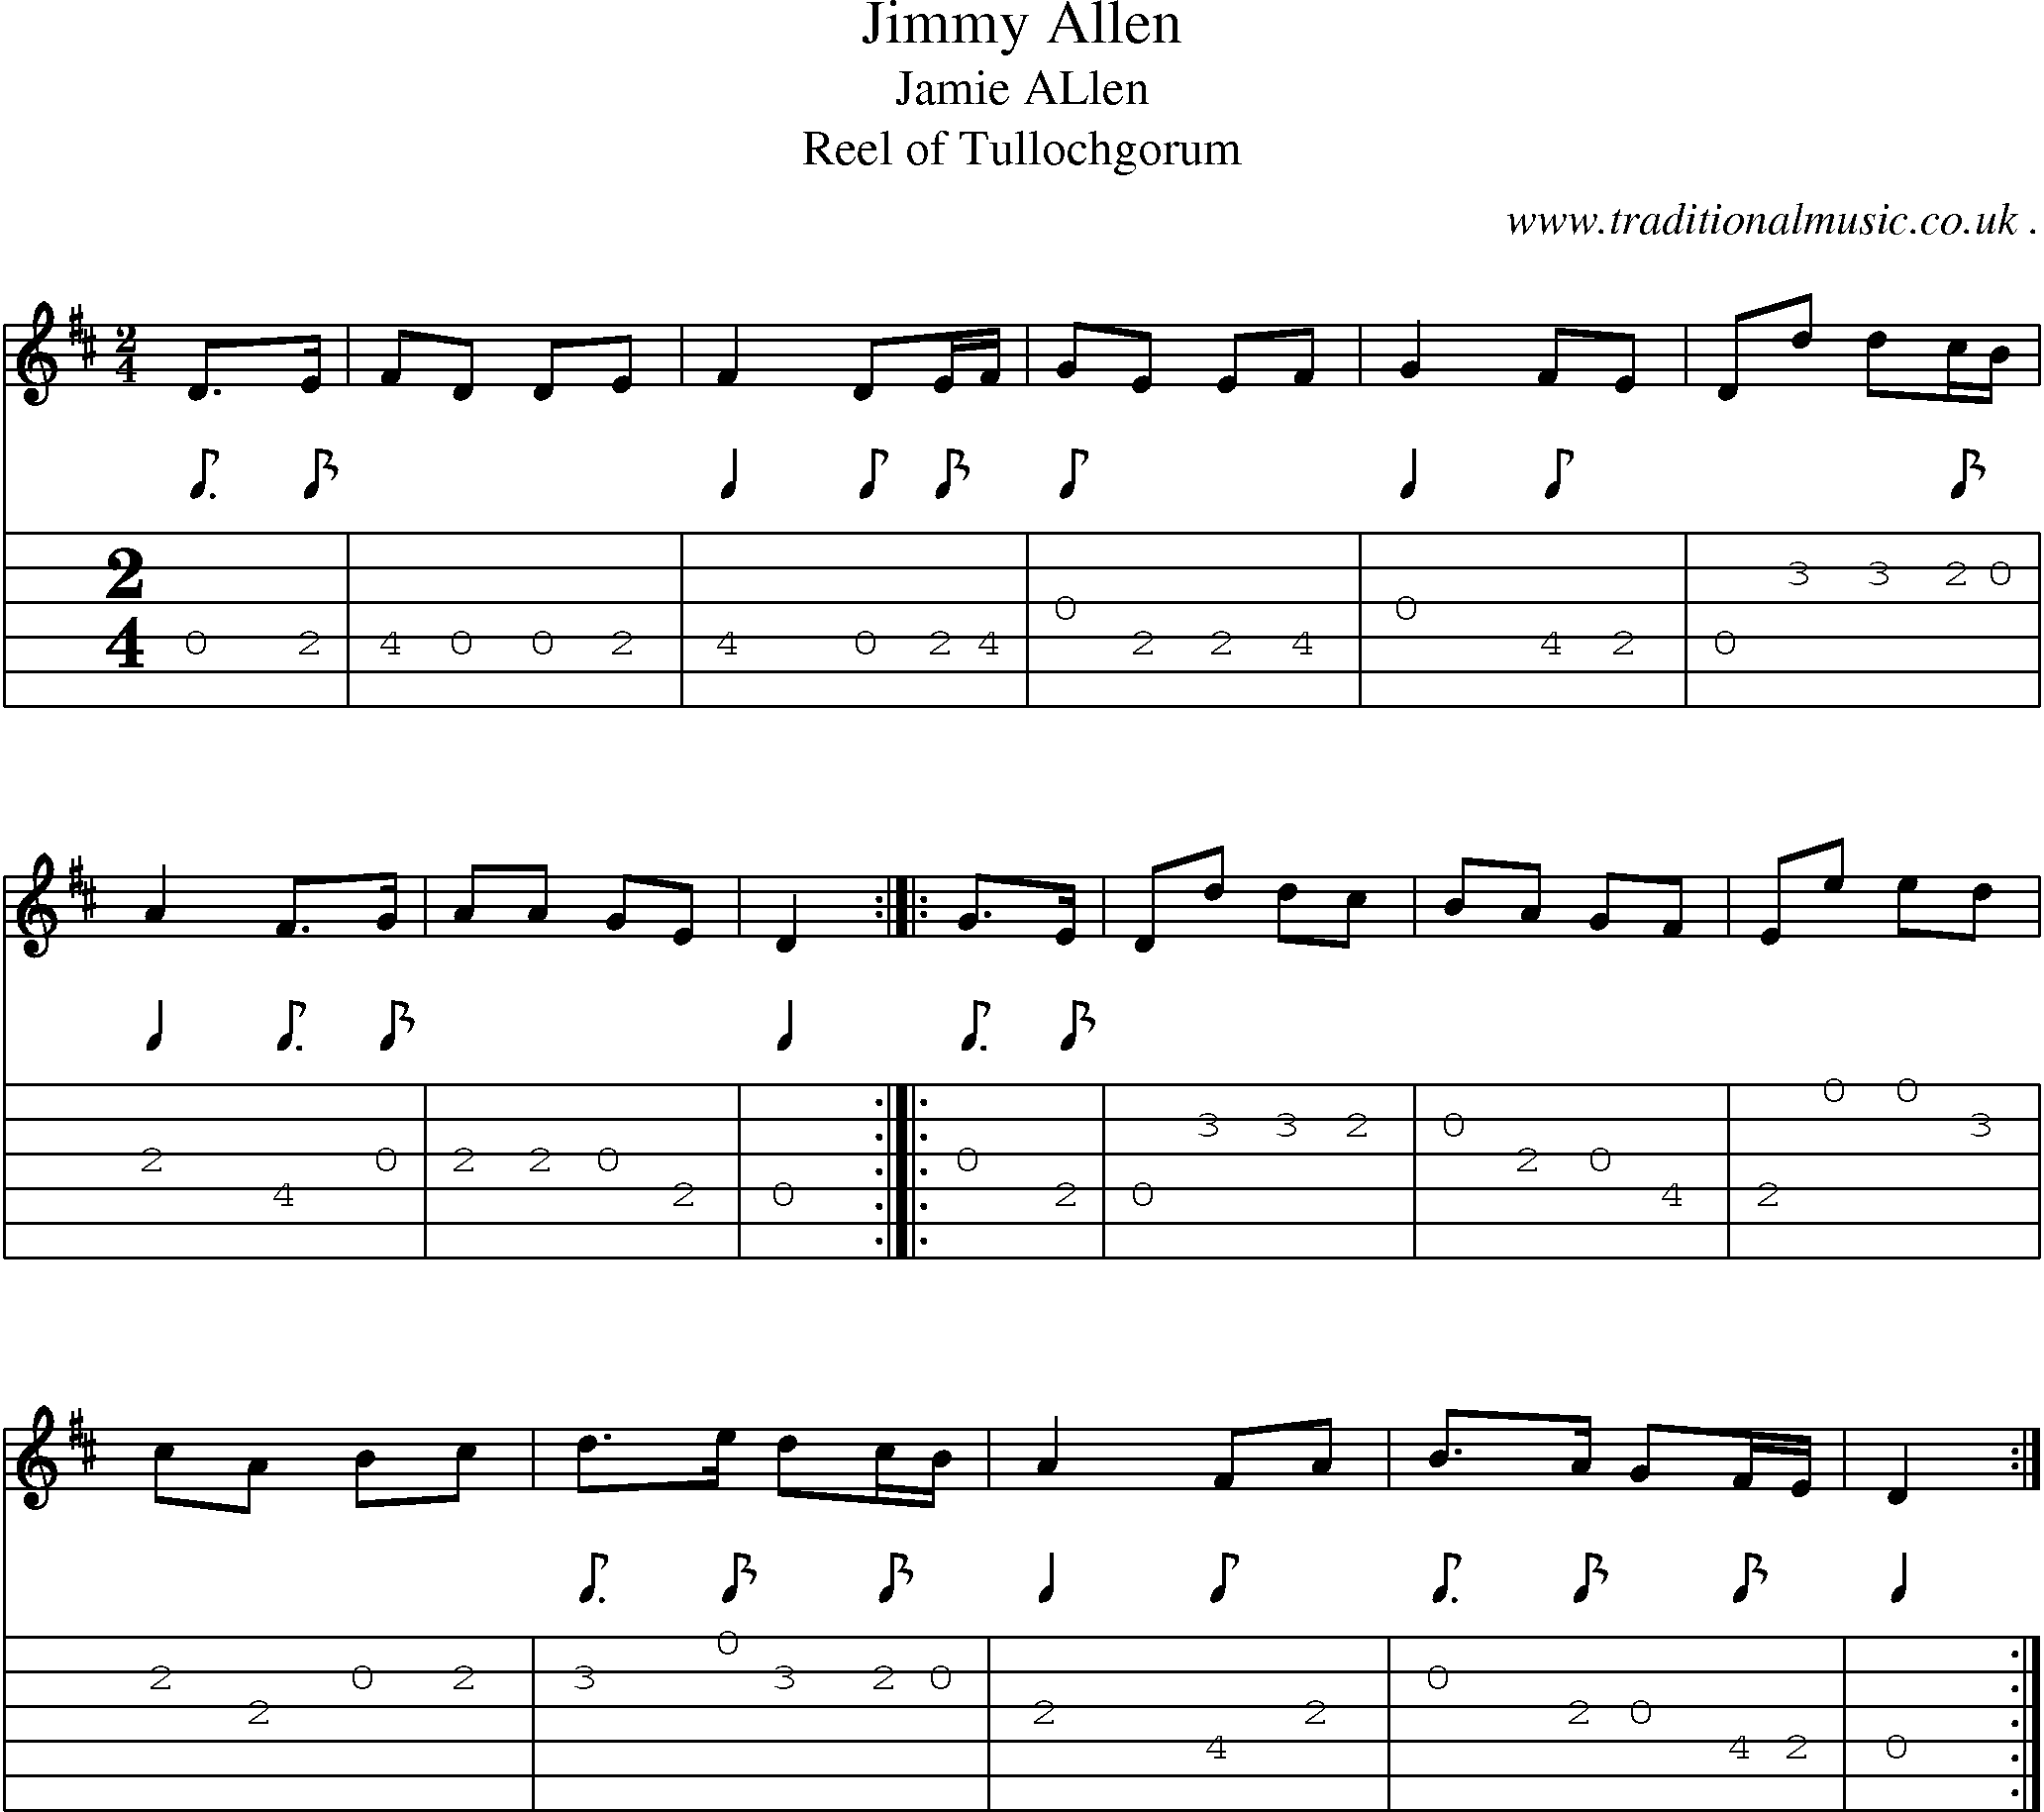 Sheet-music  score, Chords and Guitar Tabs for Jimmy Allen